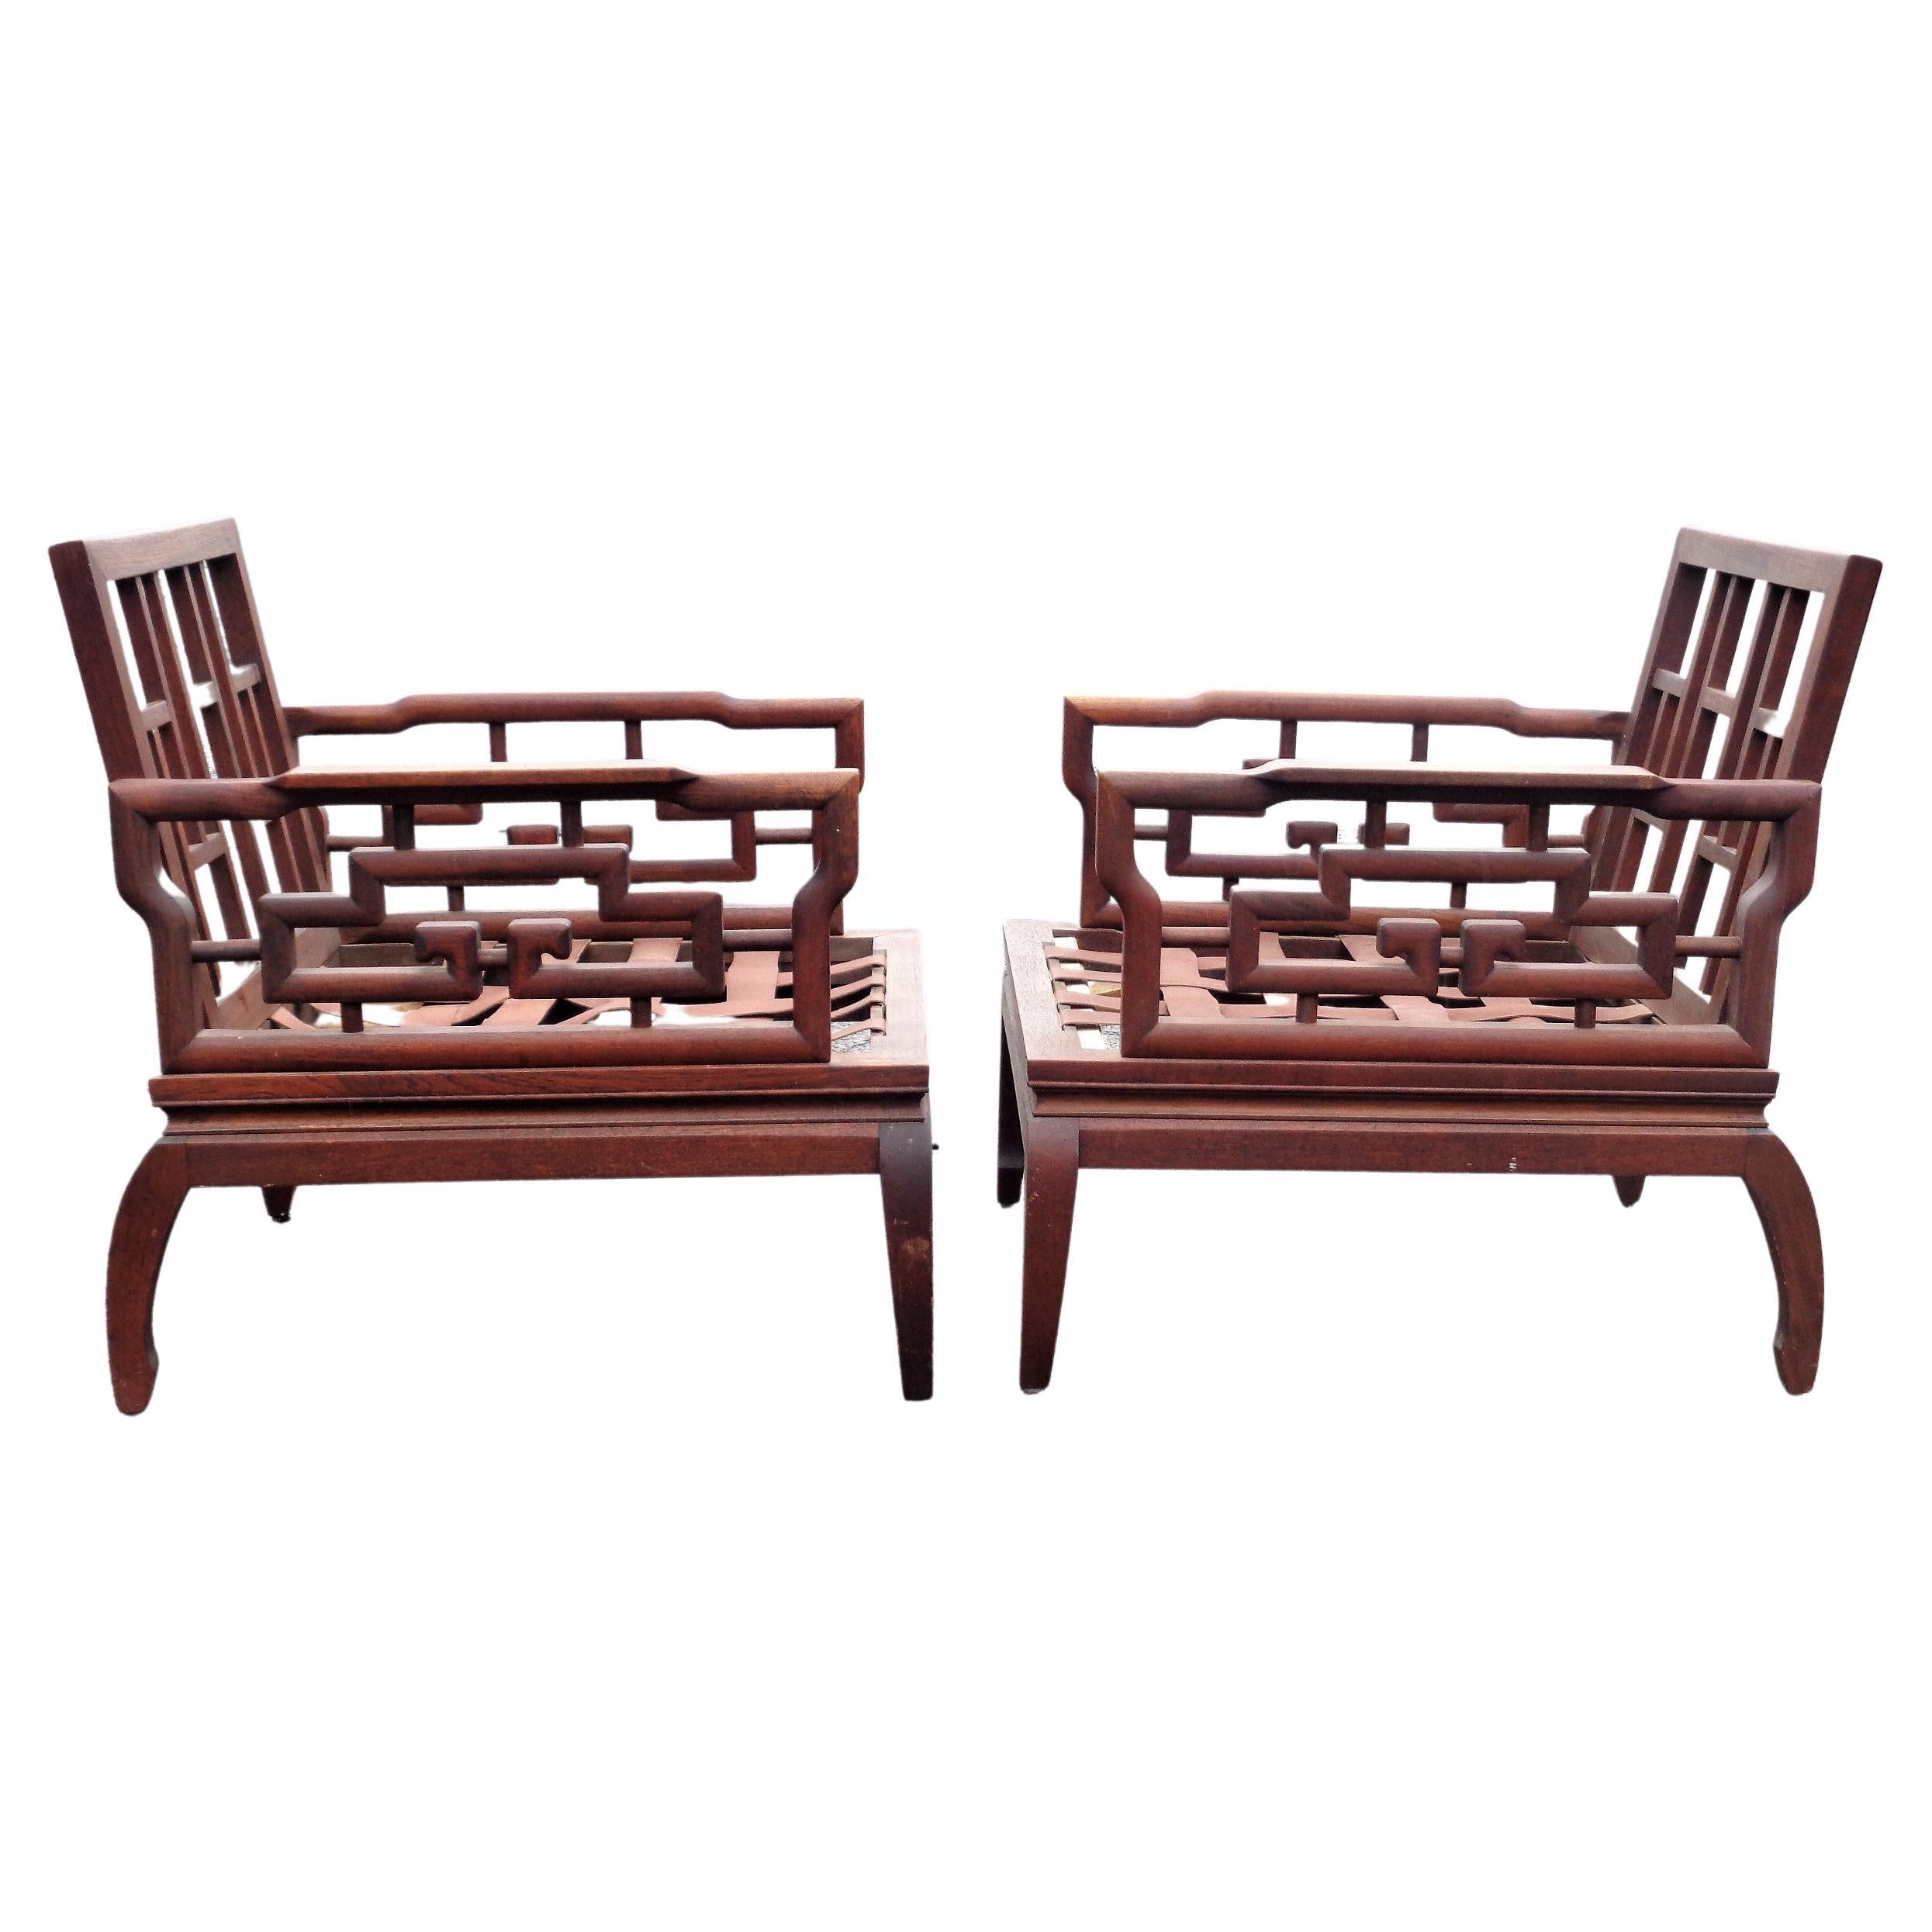 Pair Asian Ming Style Carved Mahogany Lounge Chairs, 1940-1960 For Sale 2